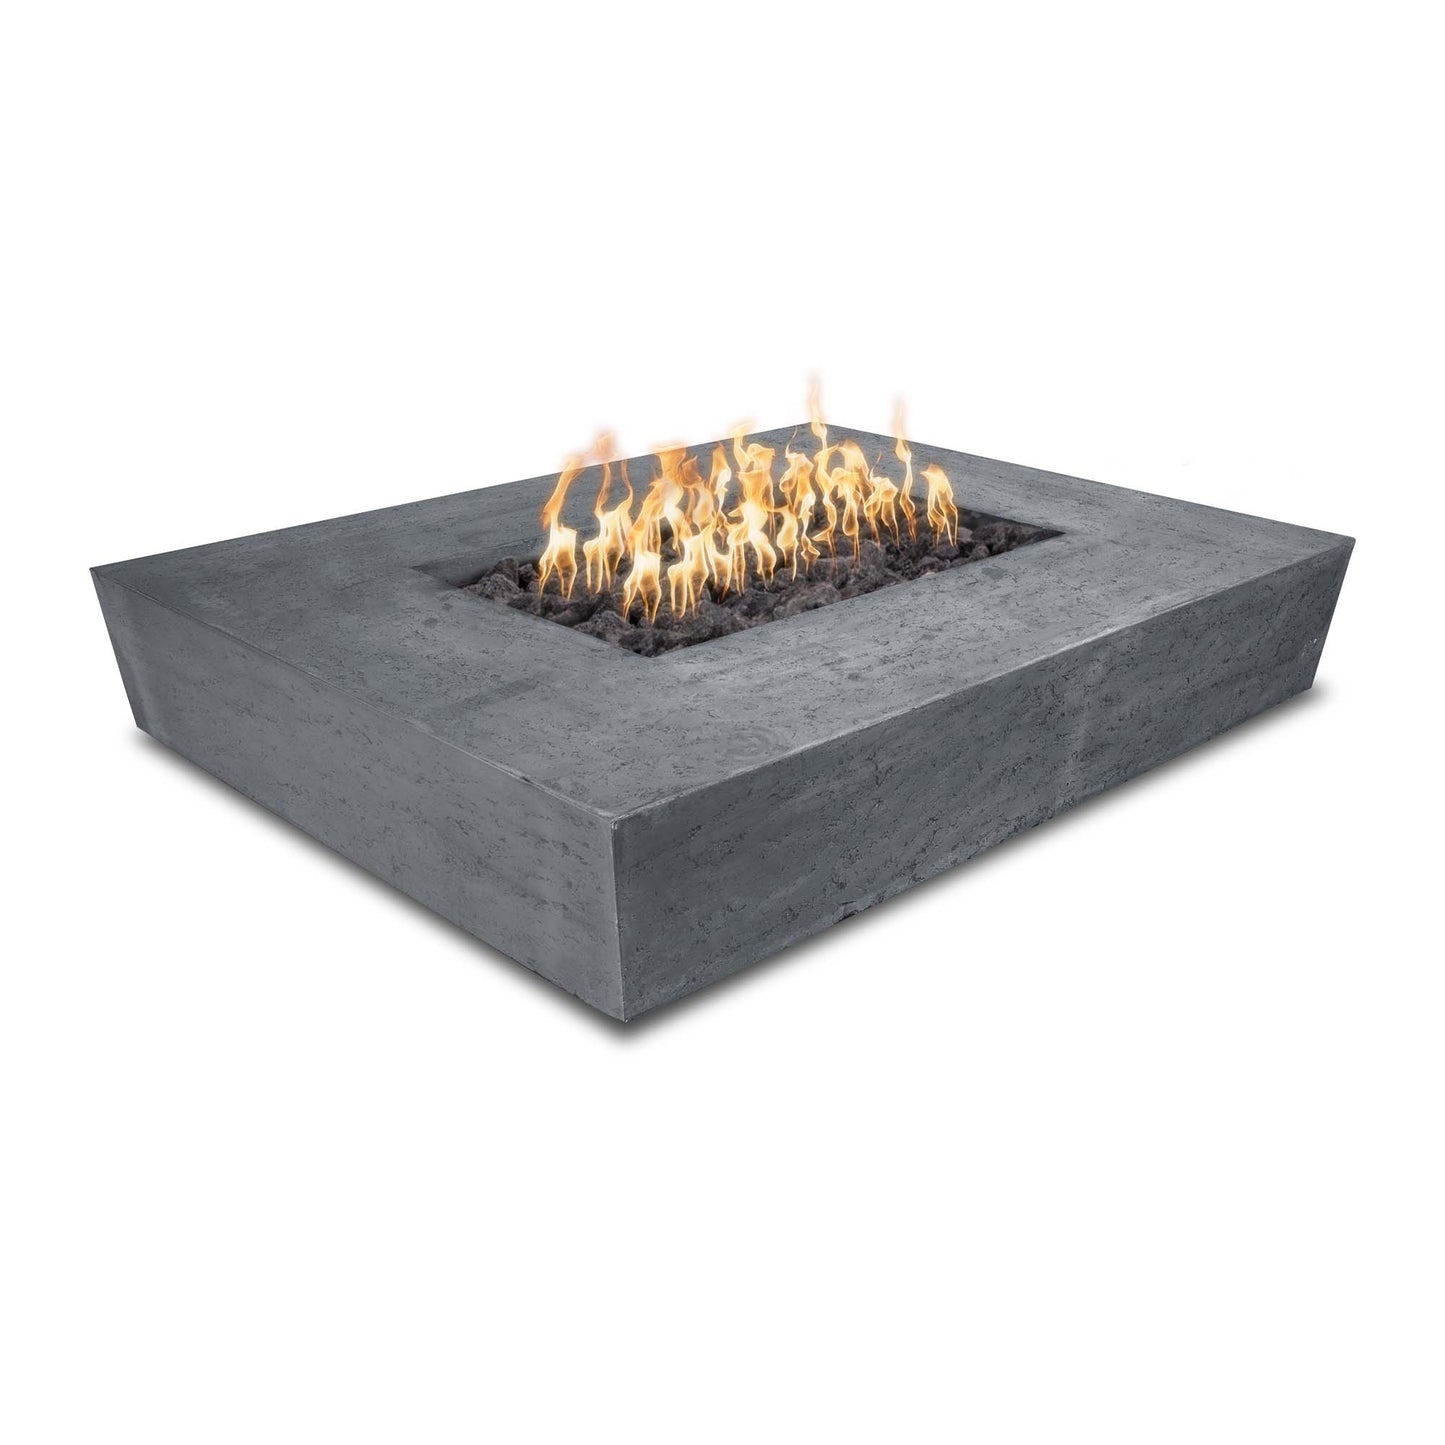 The Outdoor Plus Rectangular Heiko 58" White GFRC Concrete Liquid Propane Fire Pit with Match Lit with Flame Sense Ignition